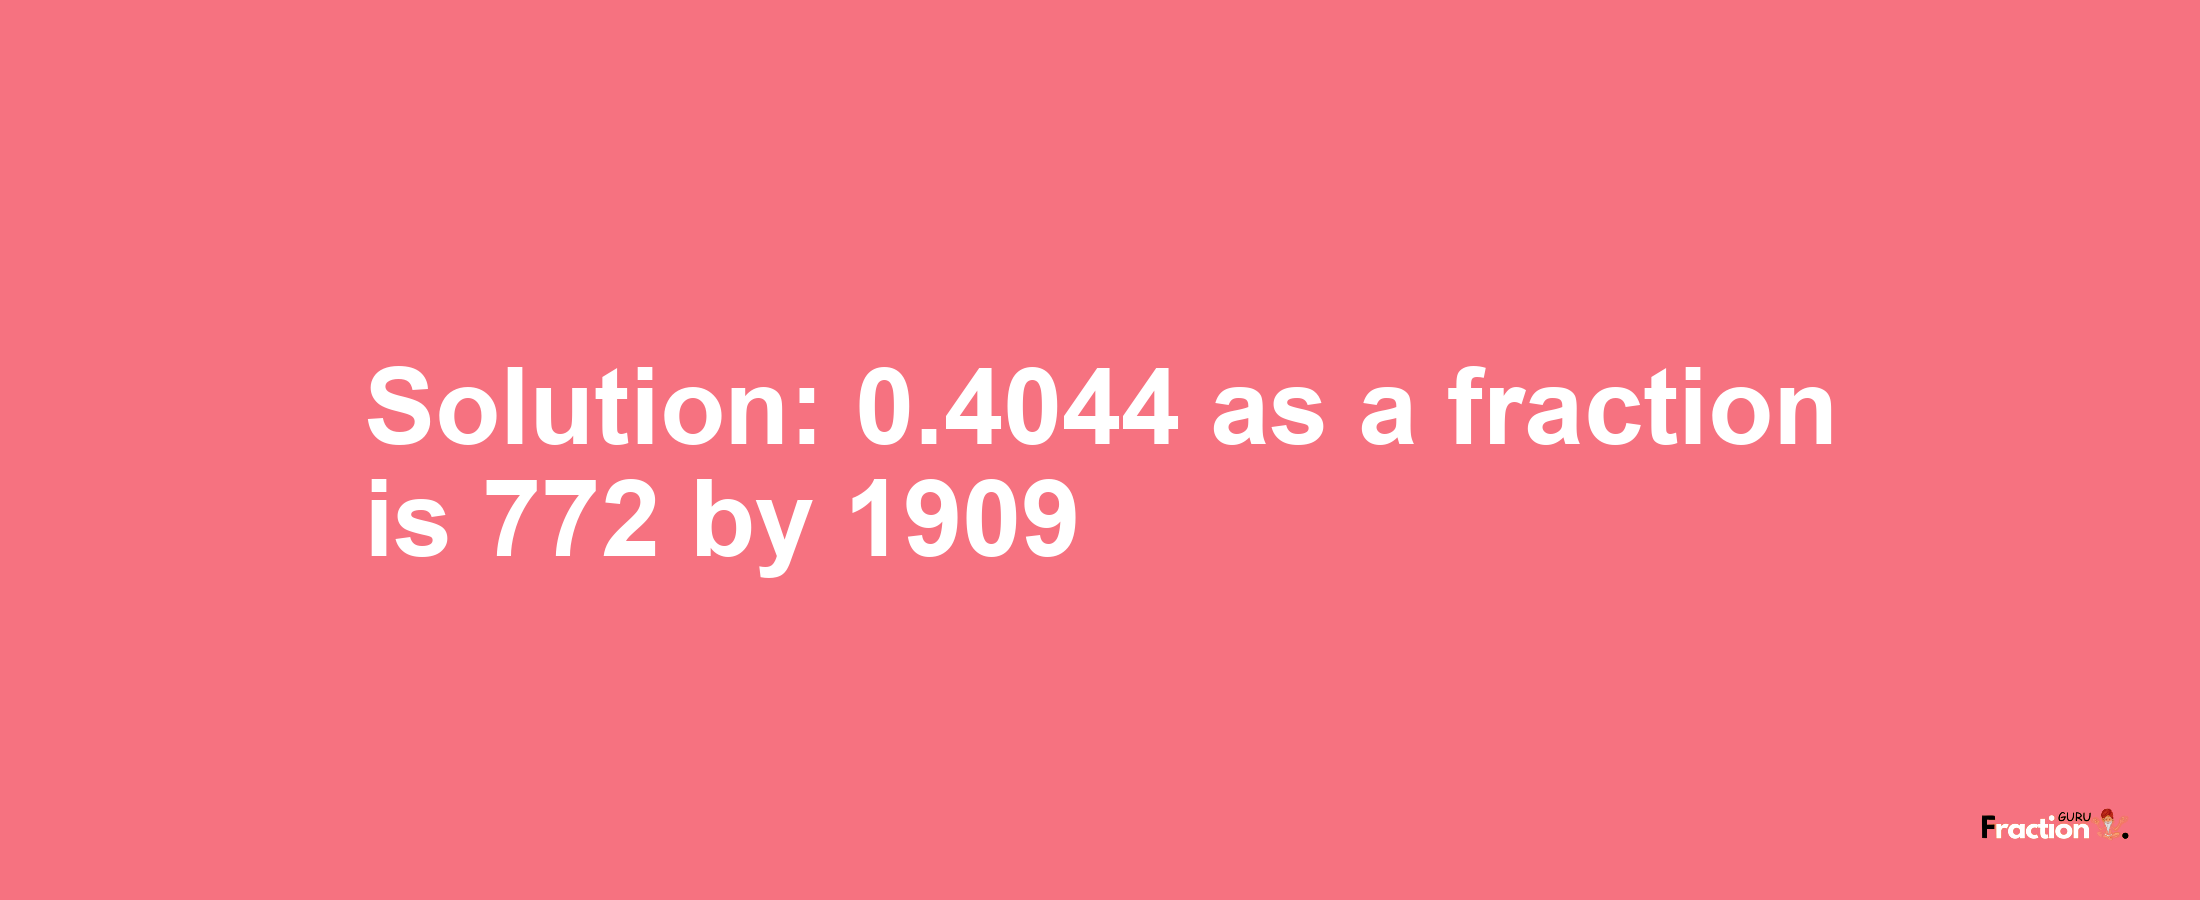 Solution:0.4044 as a fraction is 772/1909